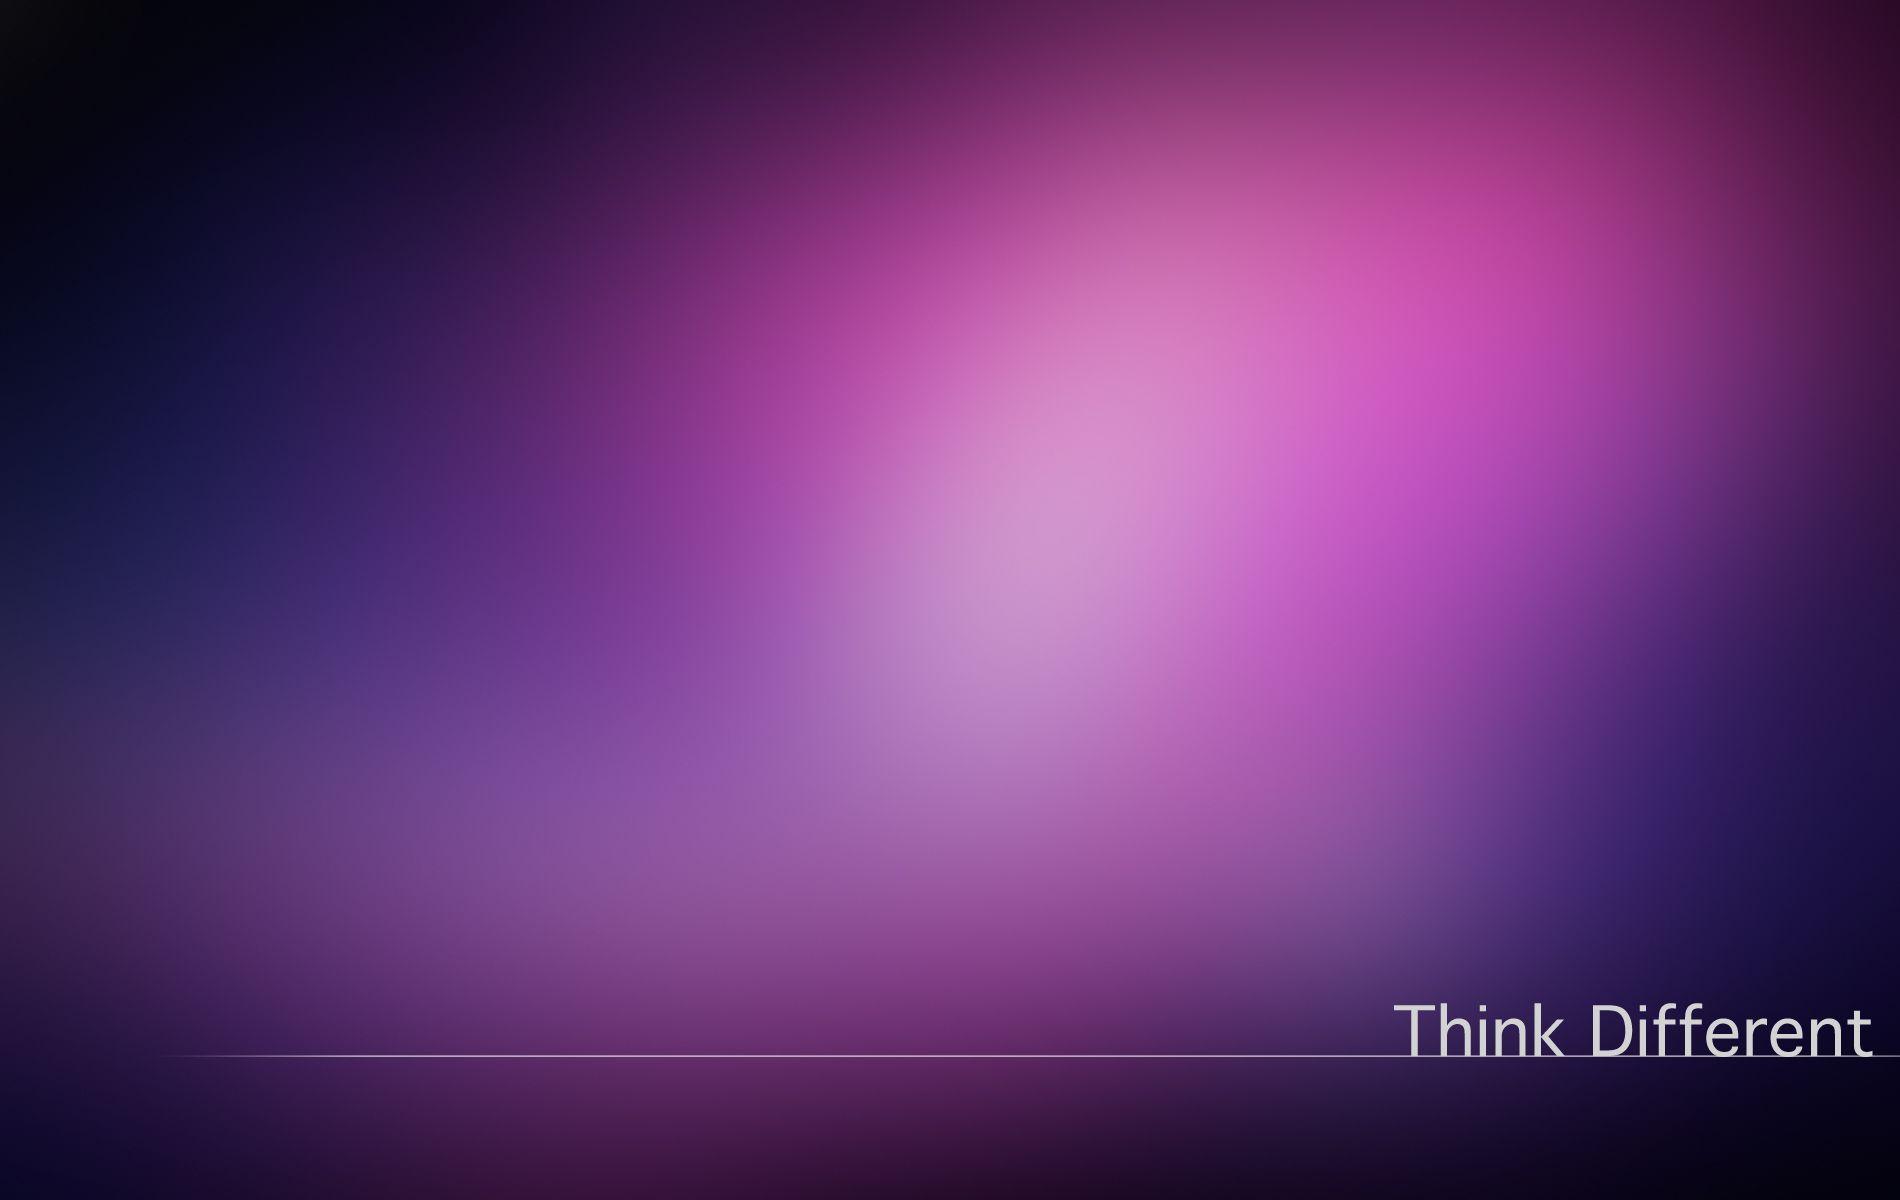 Think different wallpaper HD image